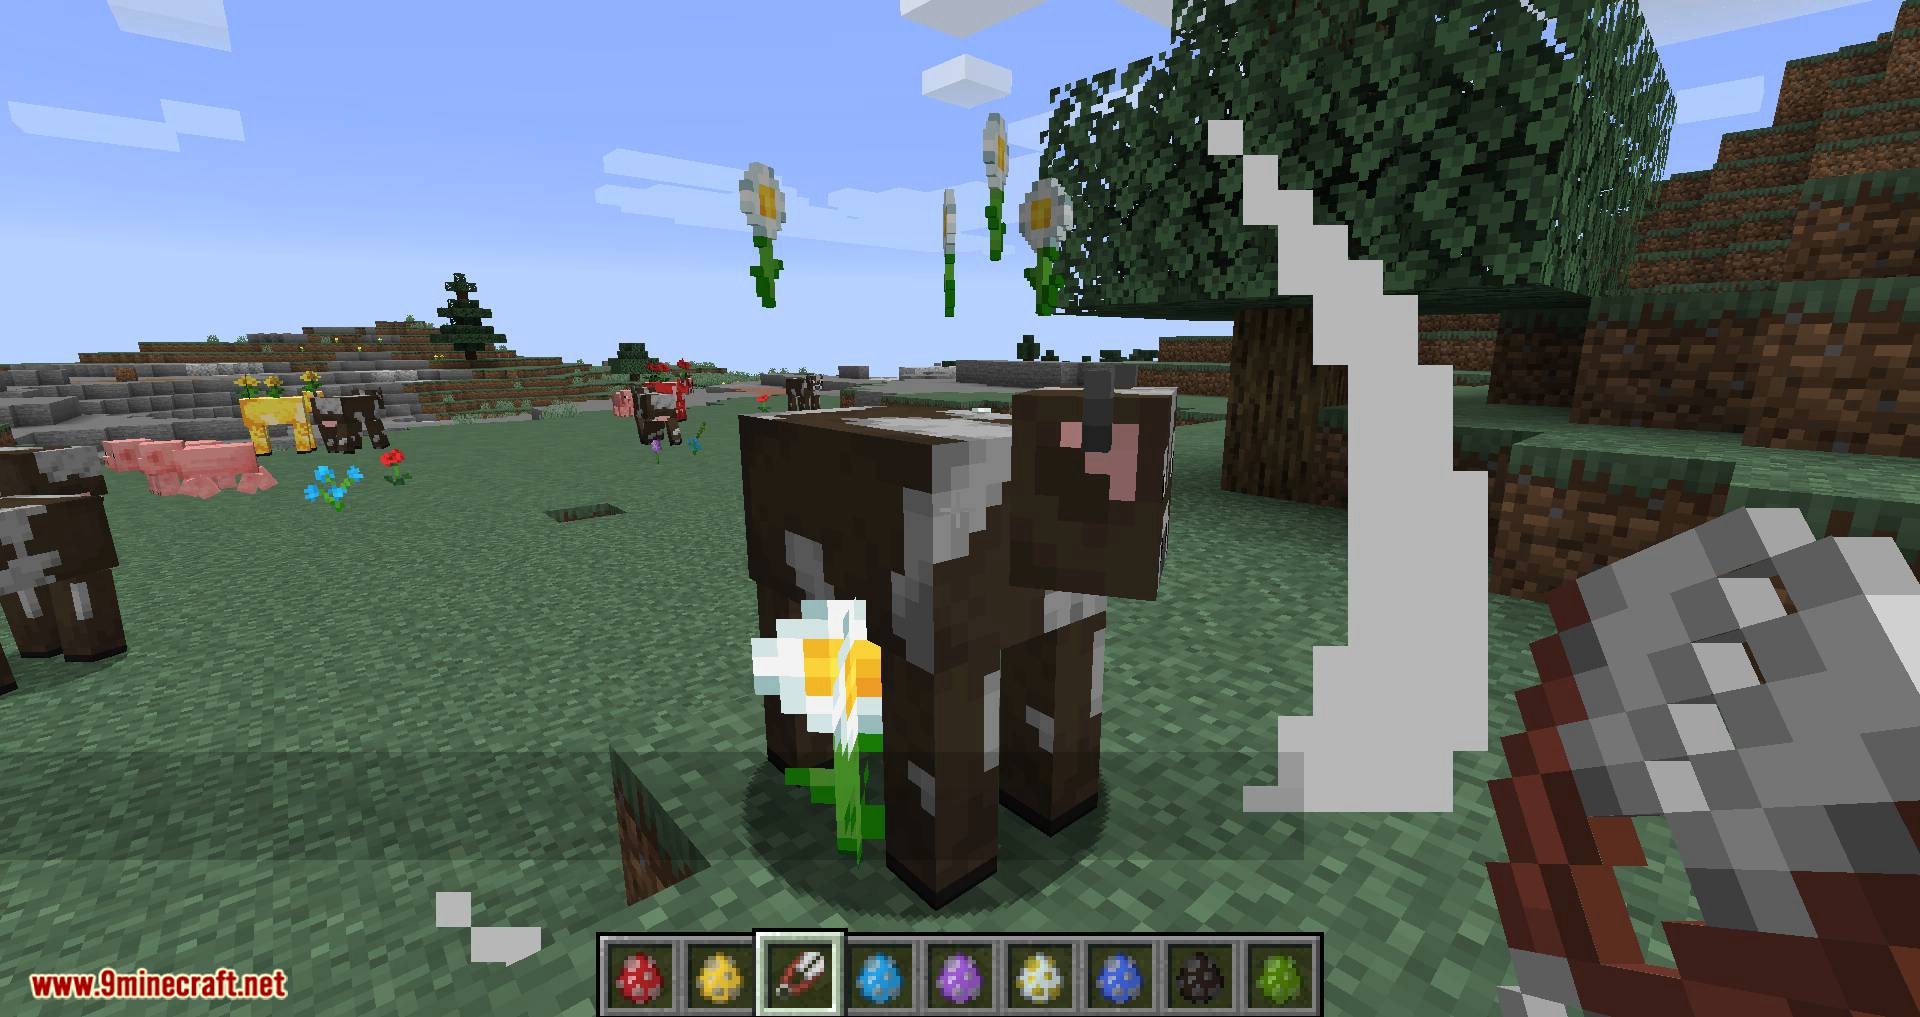 Mooblooms mod for minecraft 09